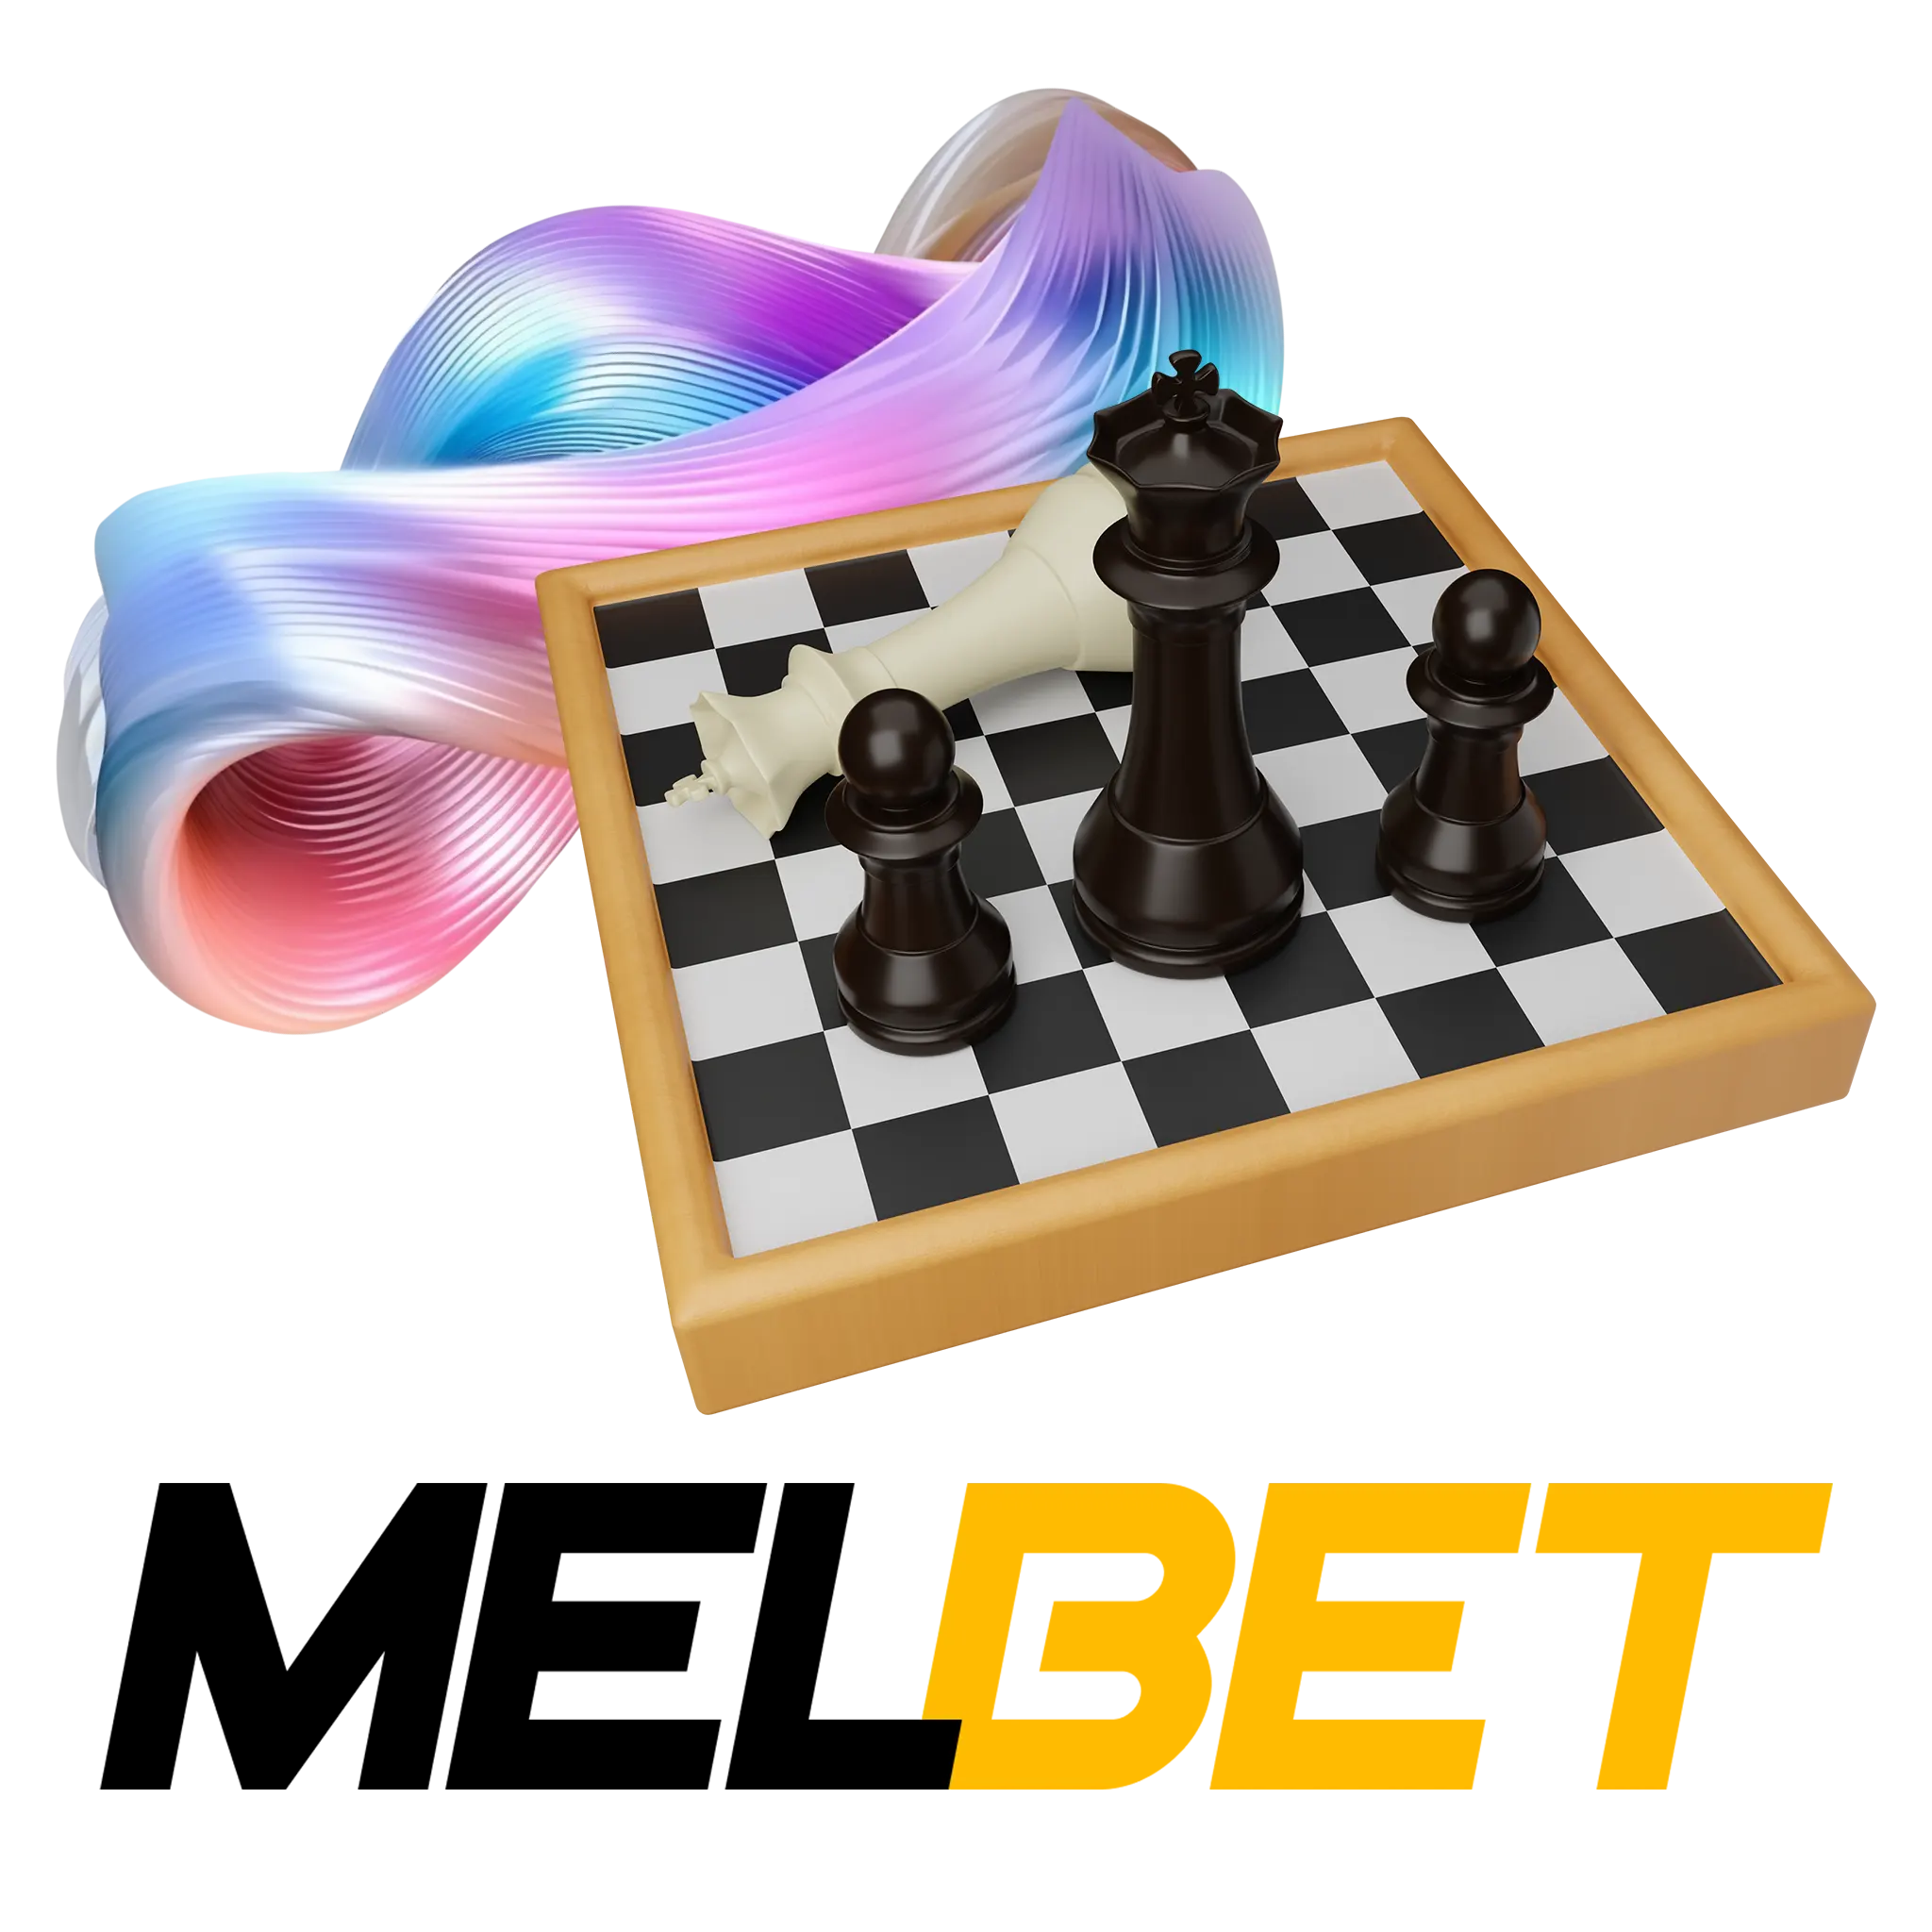 Start betting on chess games online with Melbet!